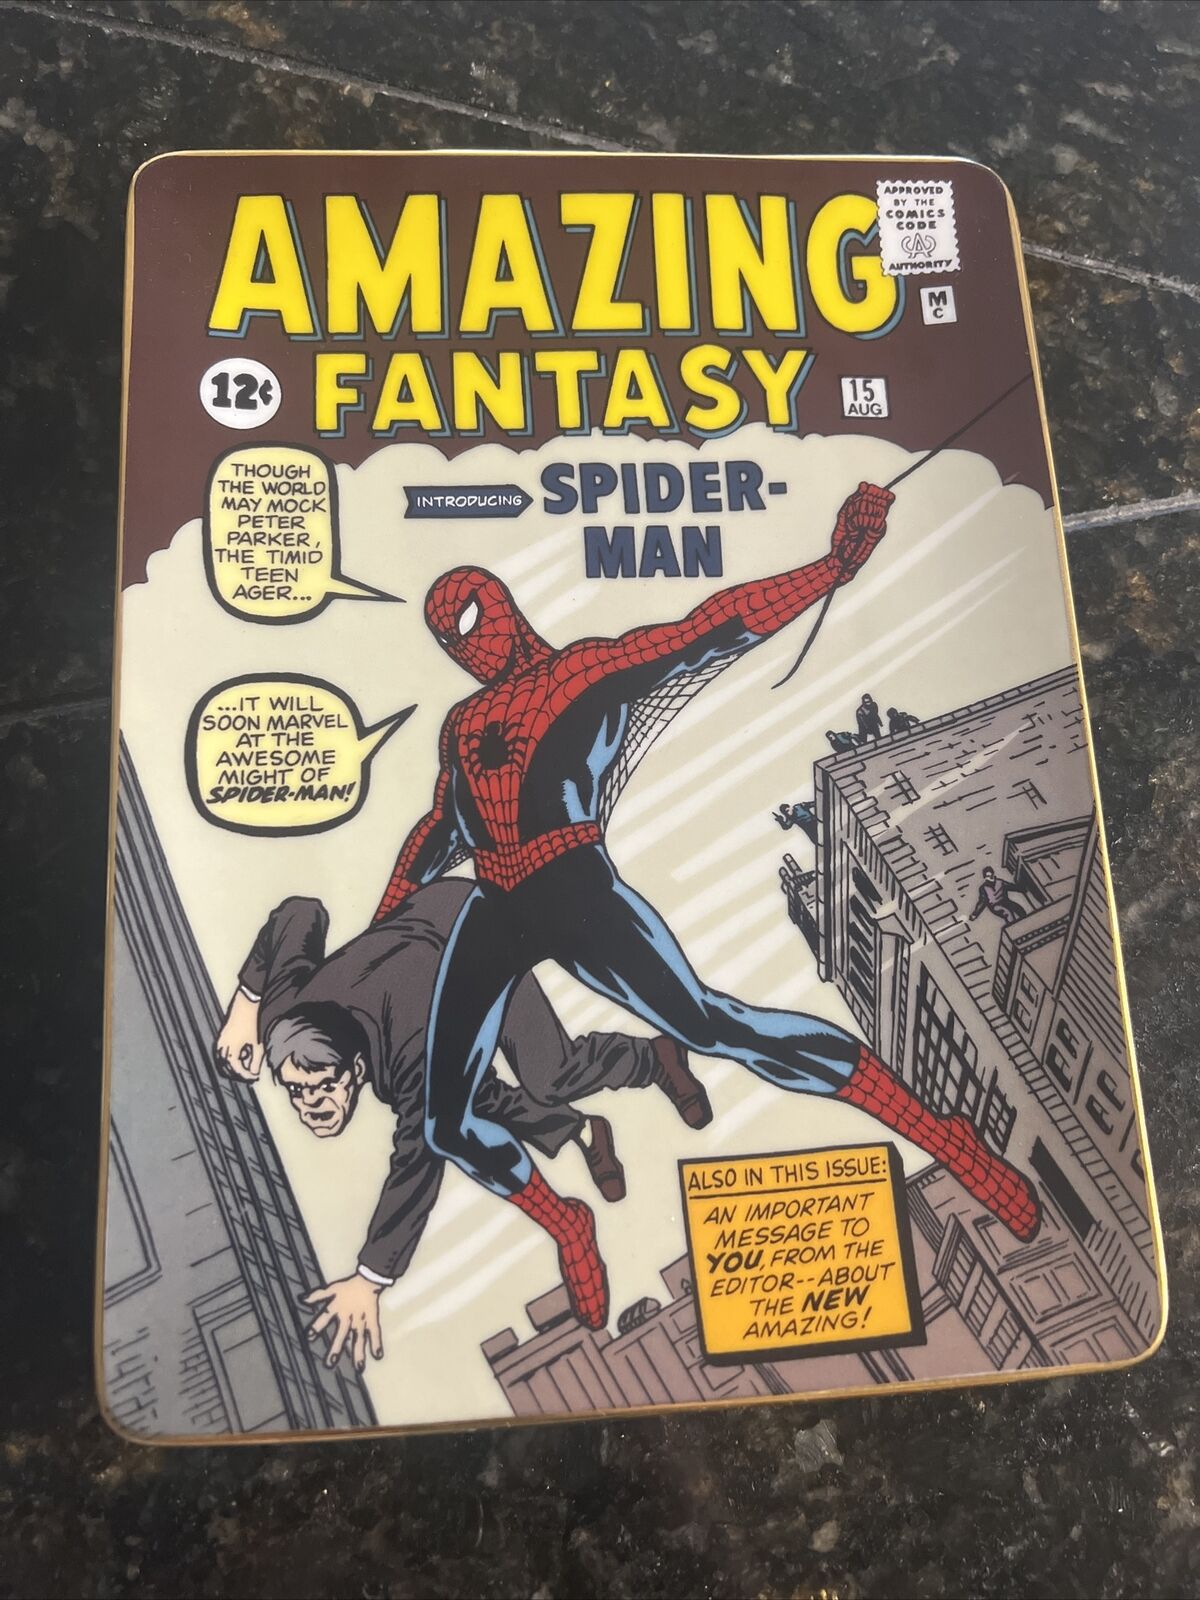 1997 Amazing Fantasy Spiderman Comic Aug 1962 Limited Edition Collector Plate